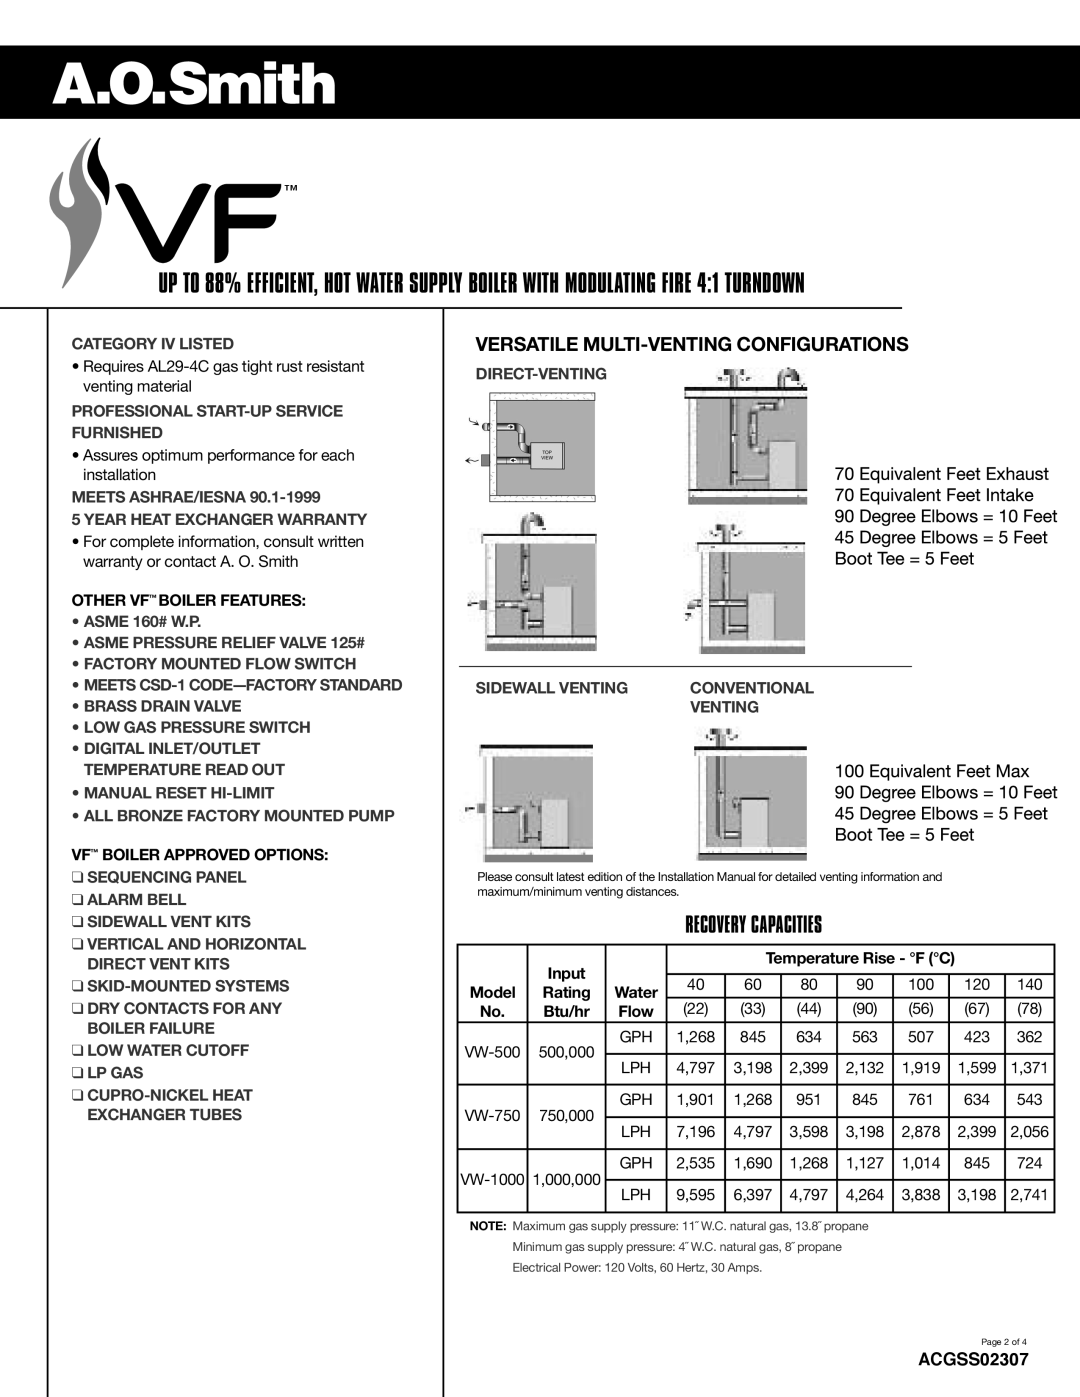 A.O. Smith VW-500 through VW-1000 Recovery Capacities, ACGSS02307, Other Vf Boiler Features, Vf Boiler Approved Options 